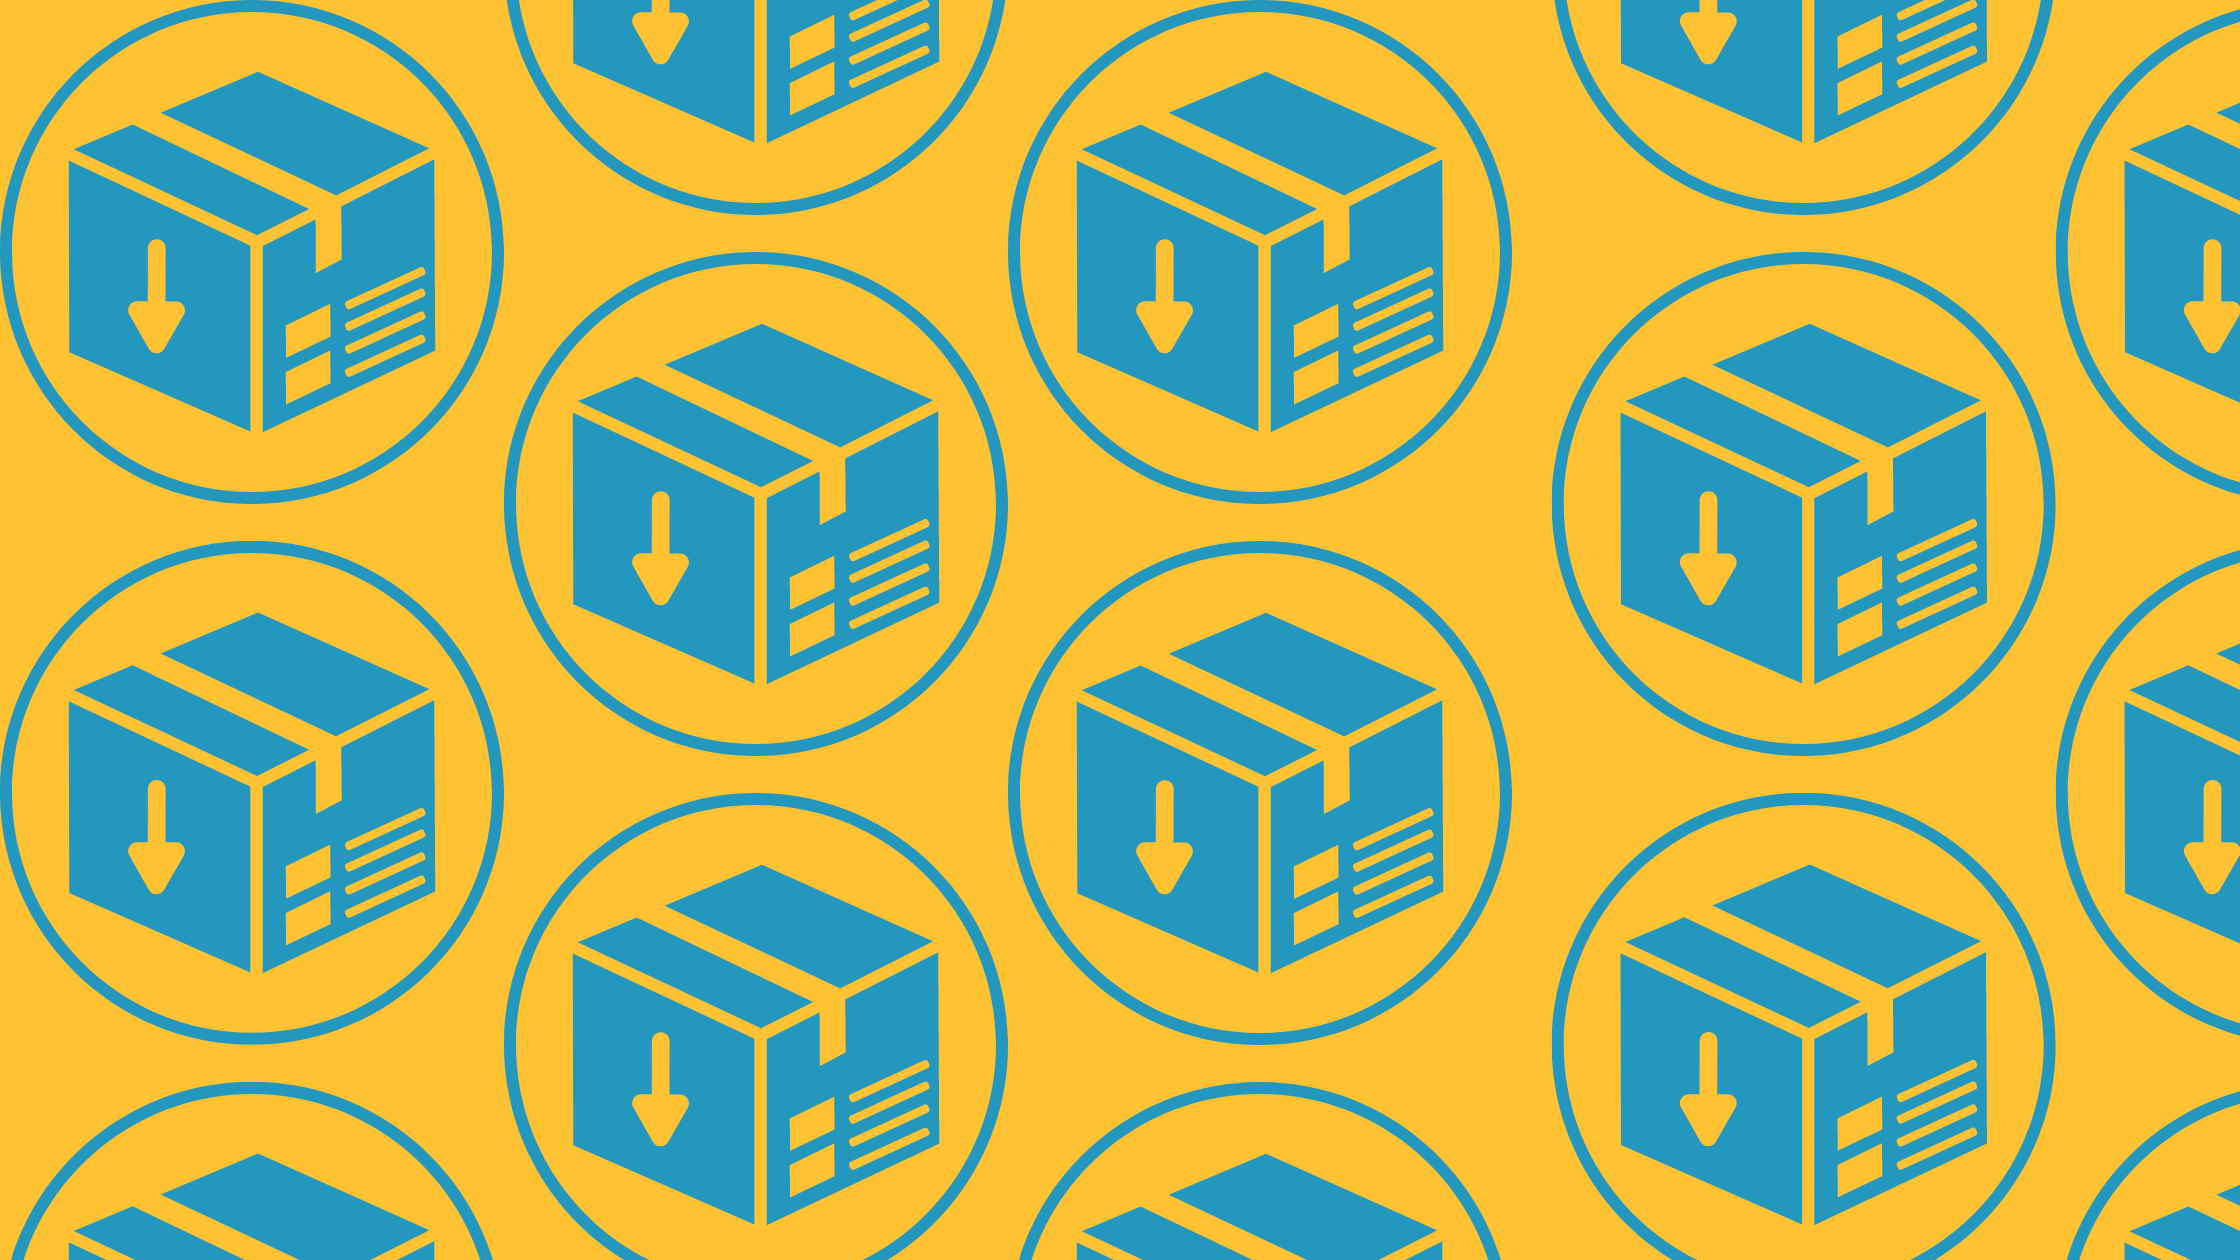 A repeating pattern of shipping box icons in circles